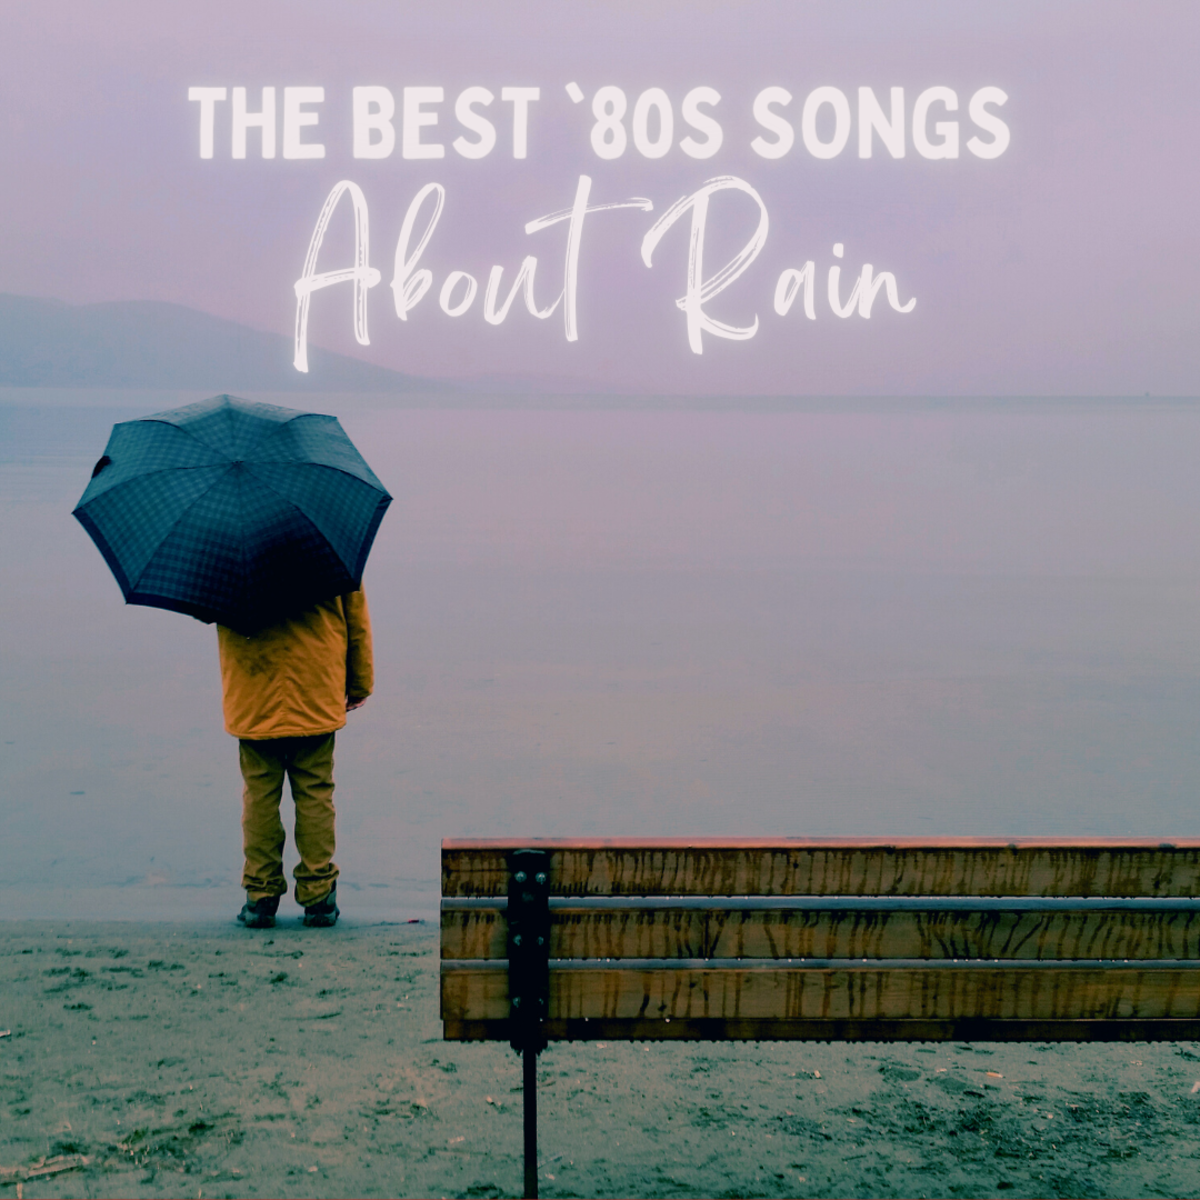 Top 14 '80s Songs About Rain